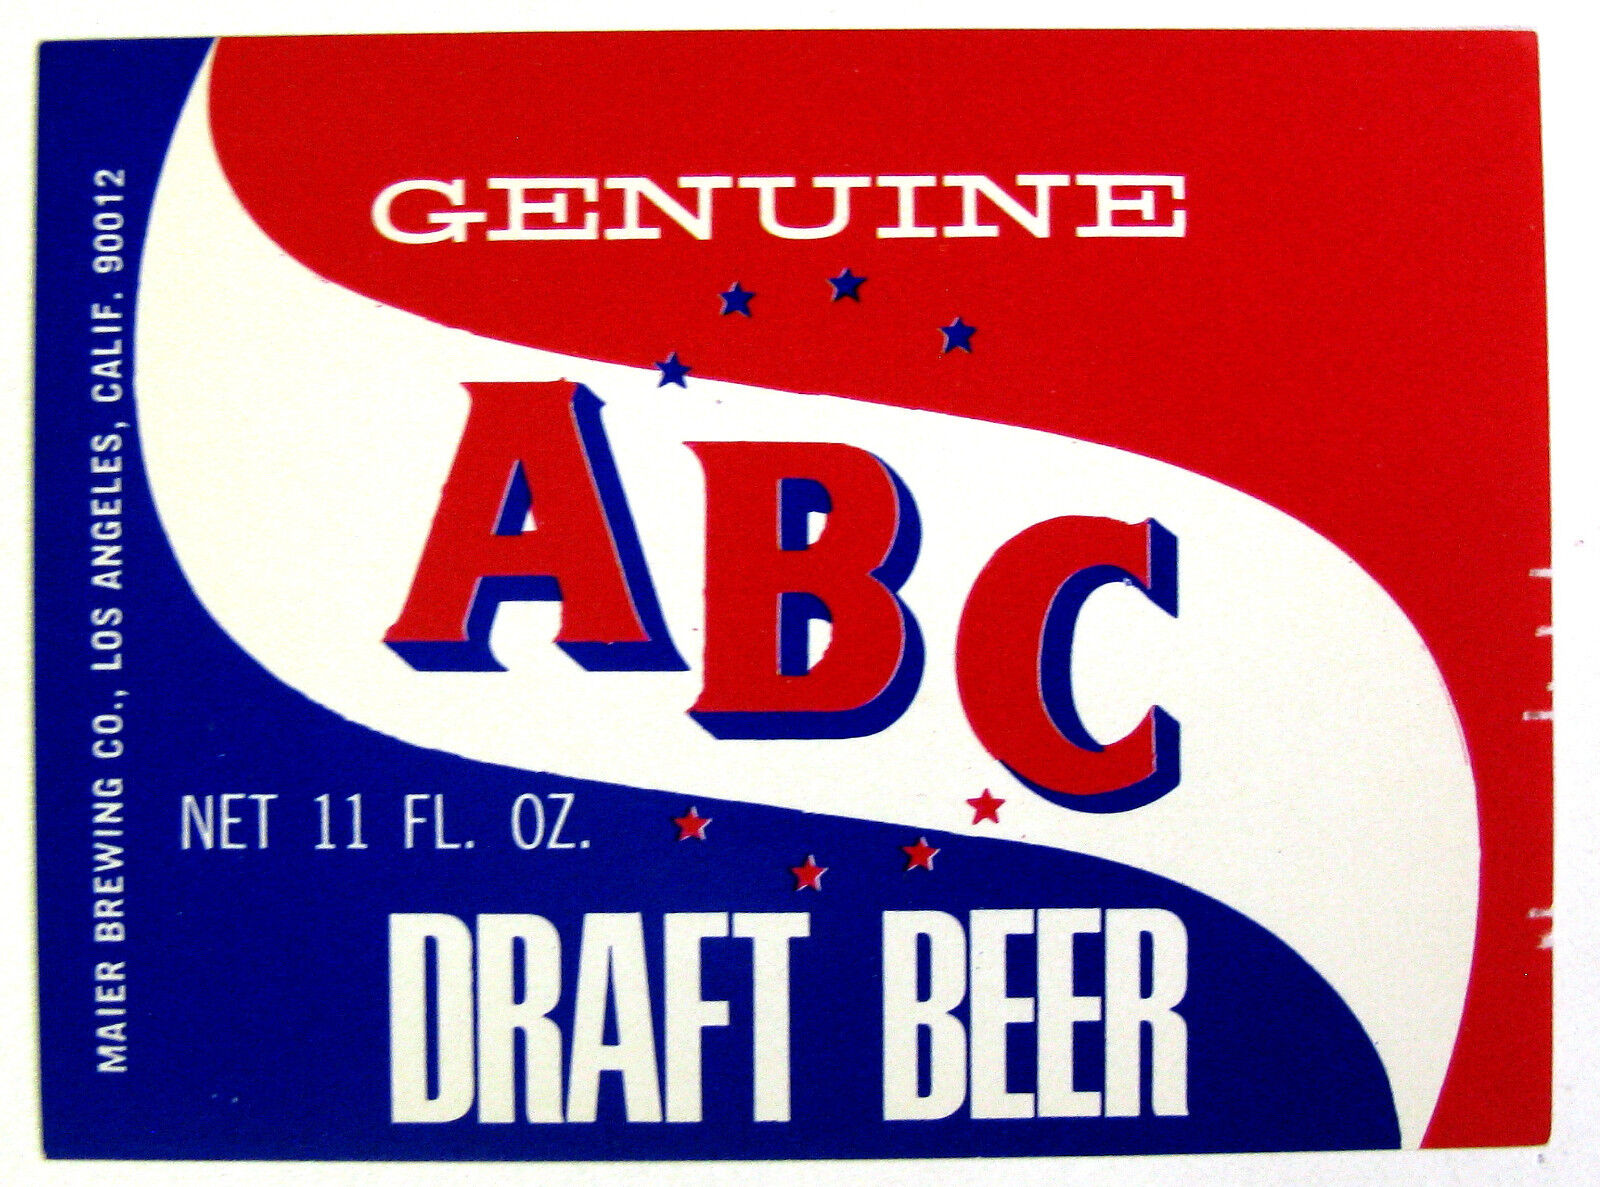 Maier Brewing Co GENUINE ABC DRAFT BEER label CA 11oz